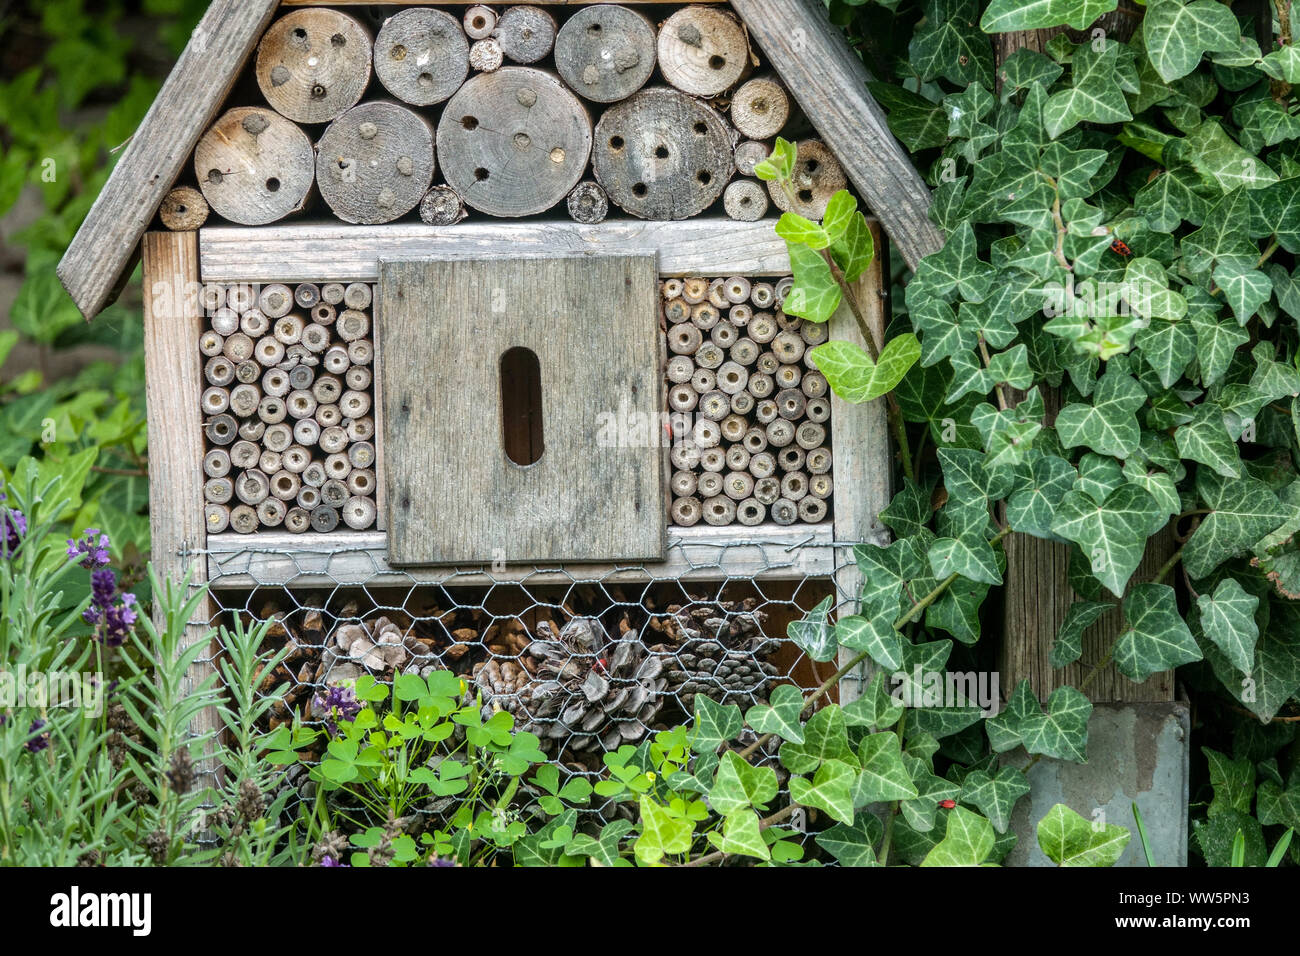 Insect hotel for the solitary bees, bee hotel in a garden, creeping plant Hedera bug hotel bee-friendly garden Stock Photo